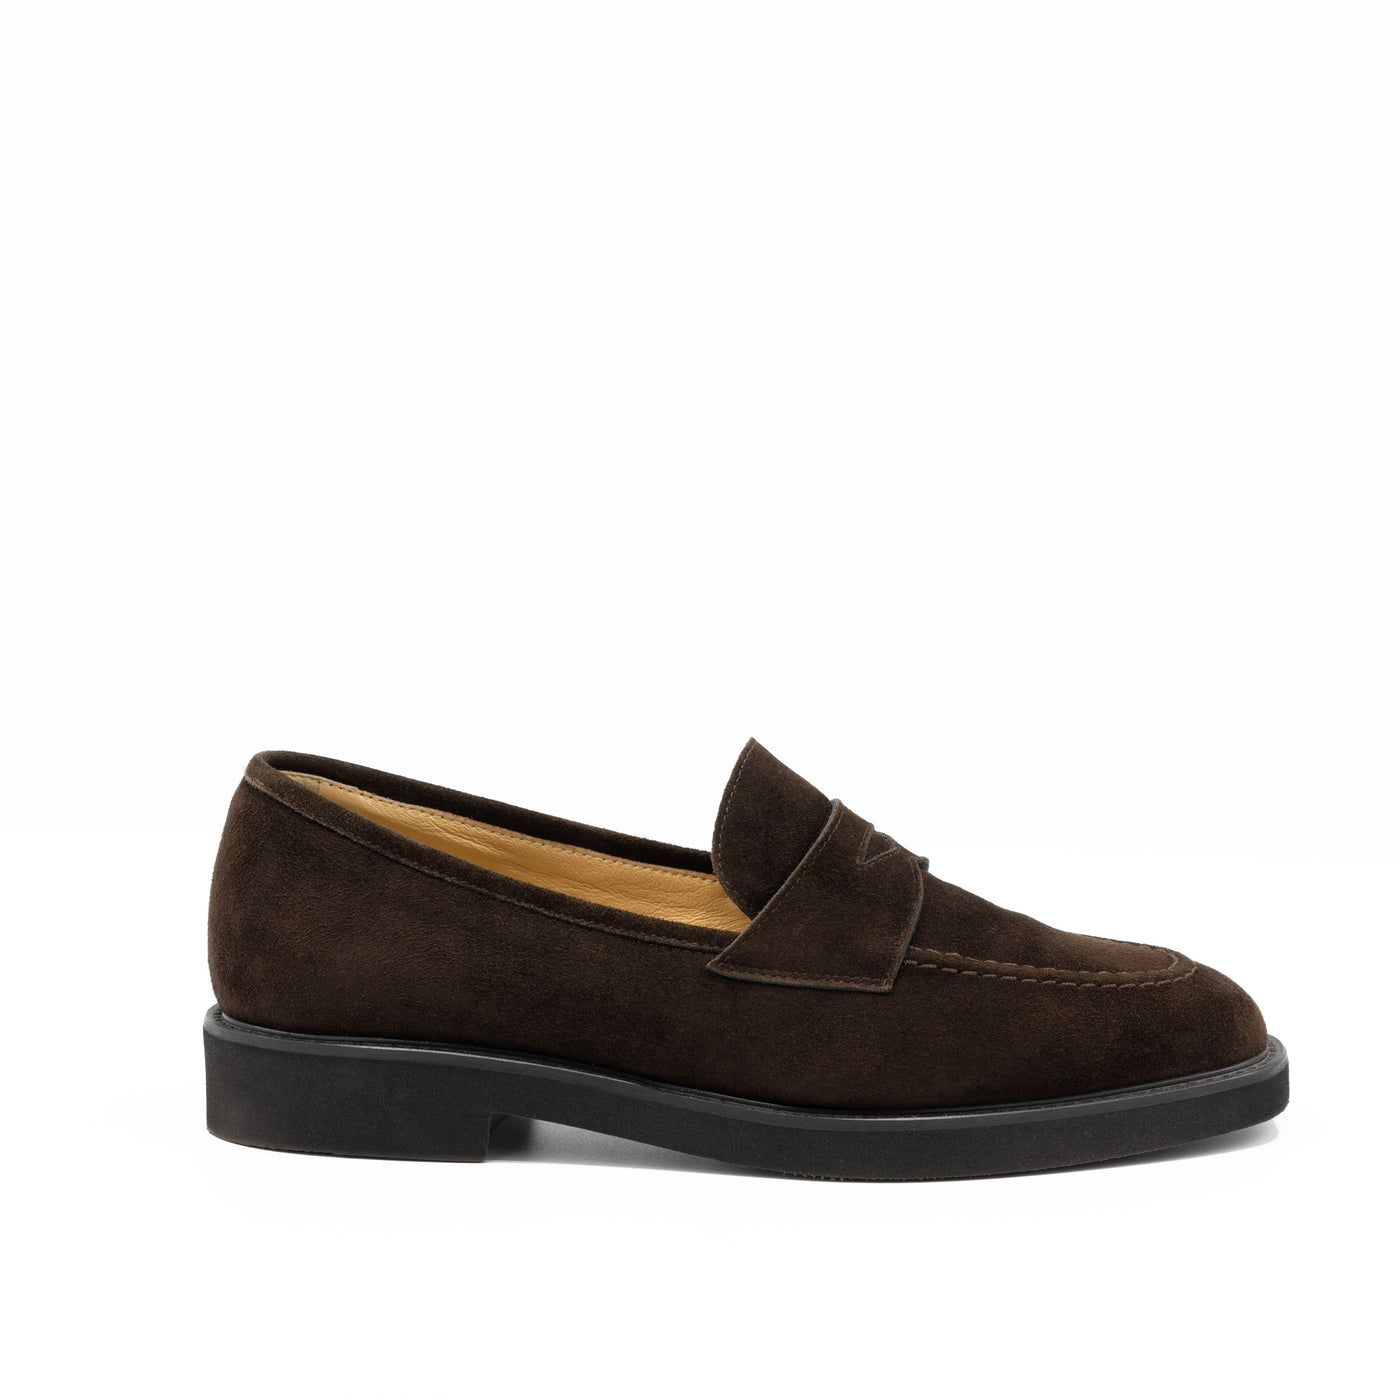 Women's brown suede leather penny loafers